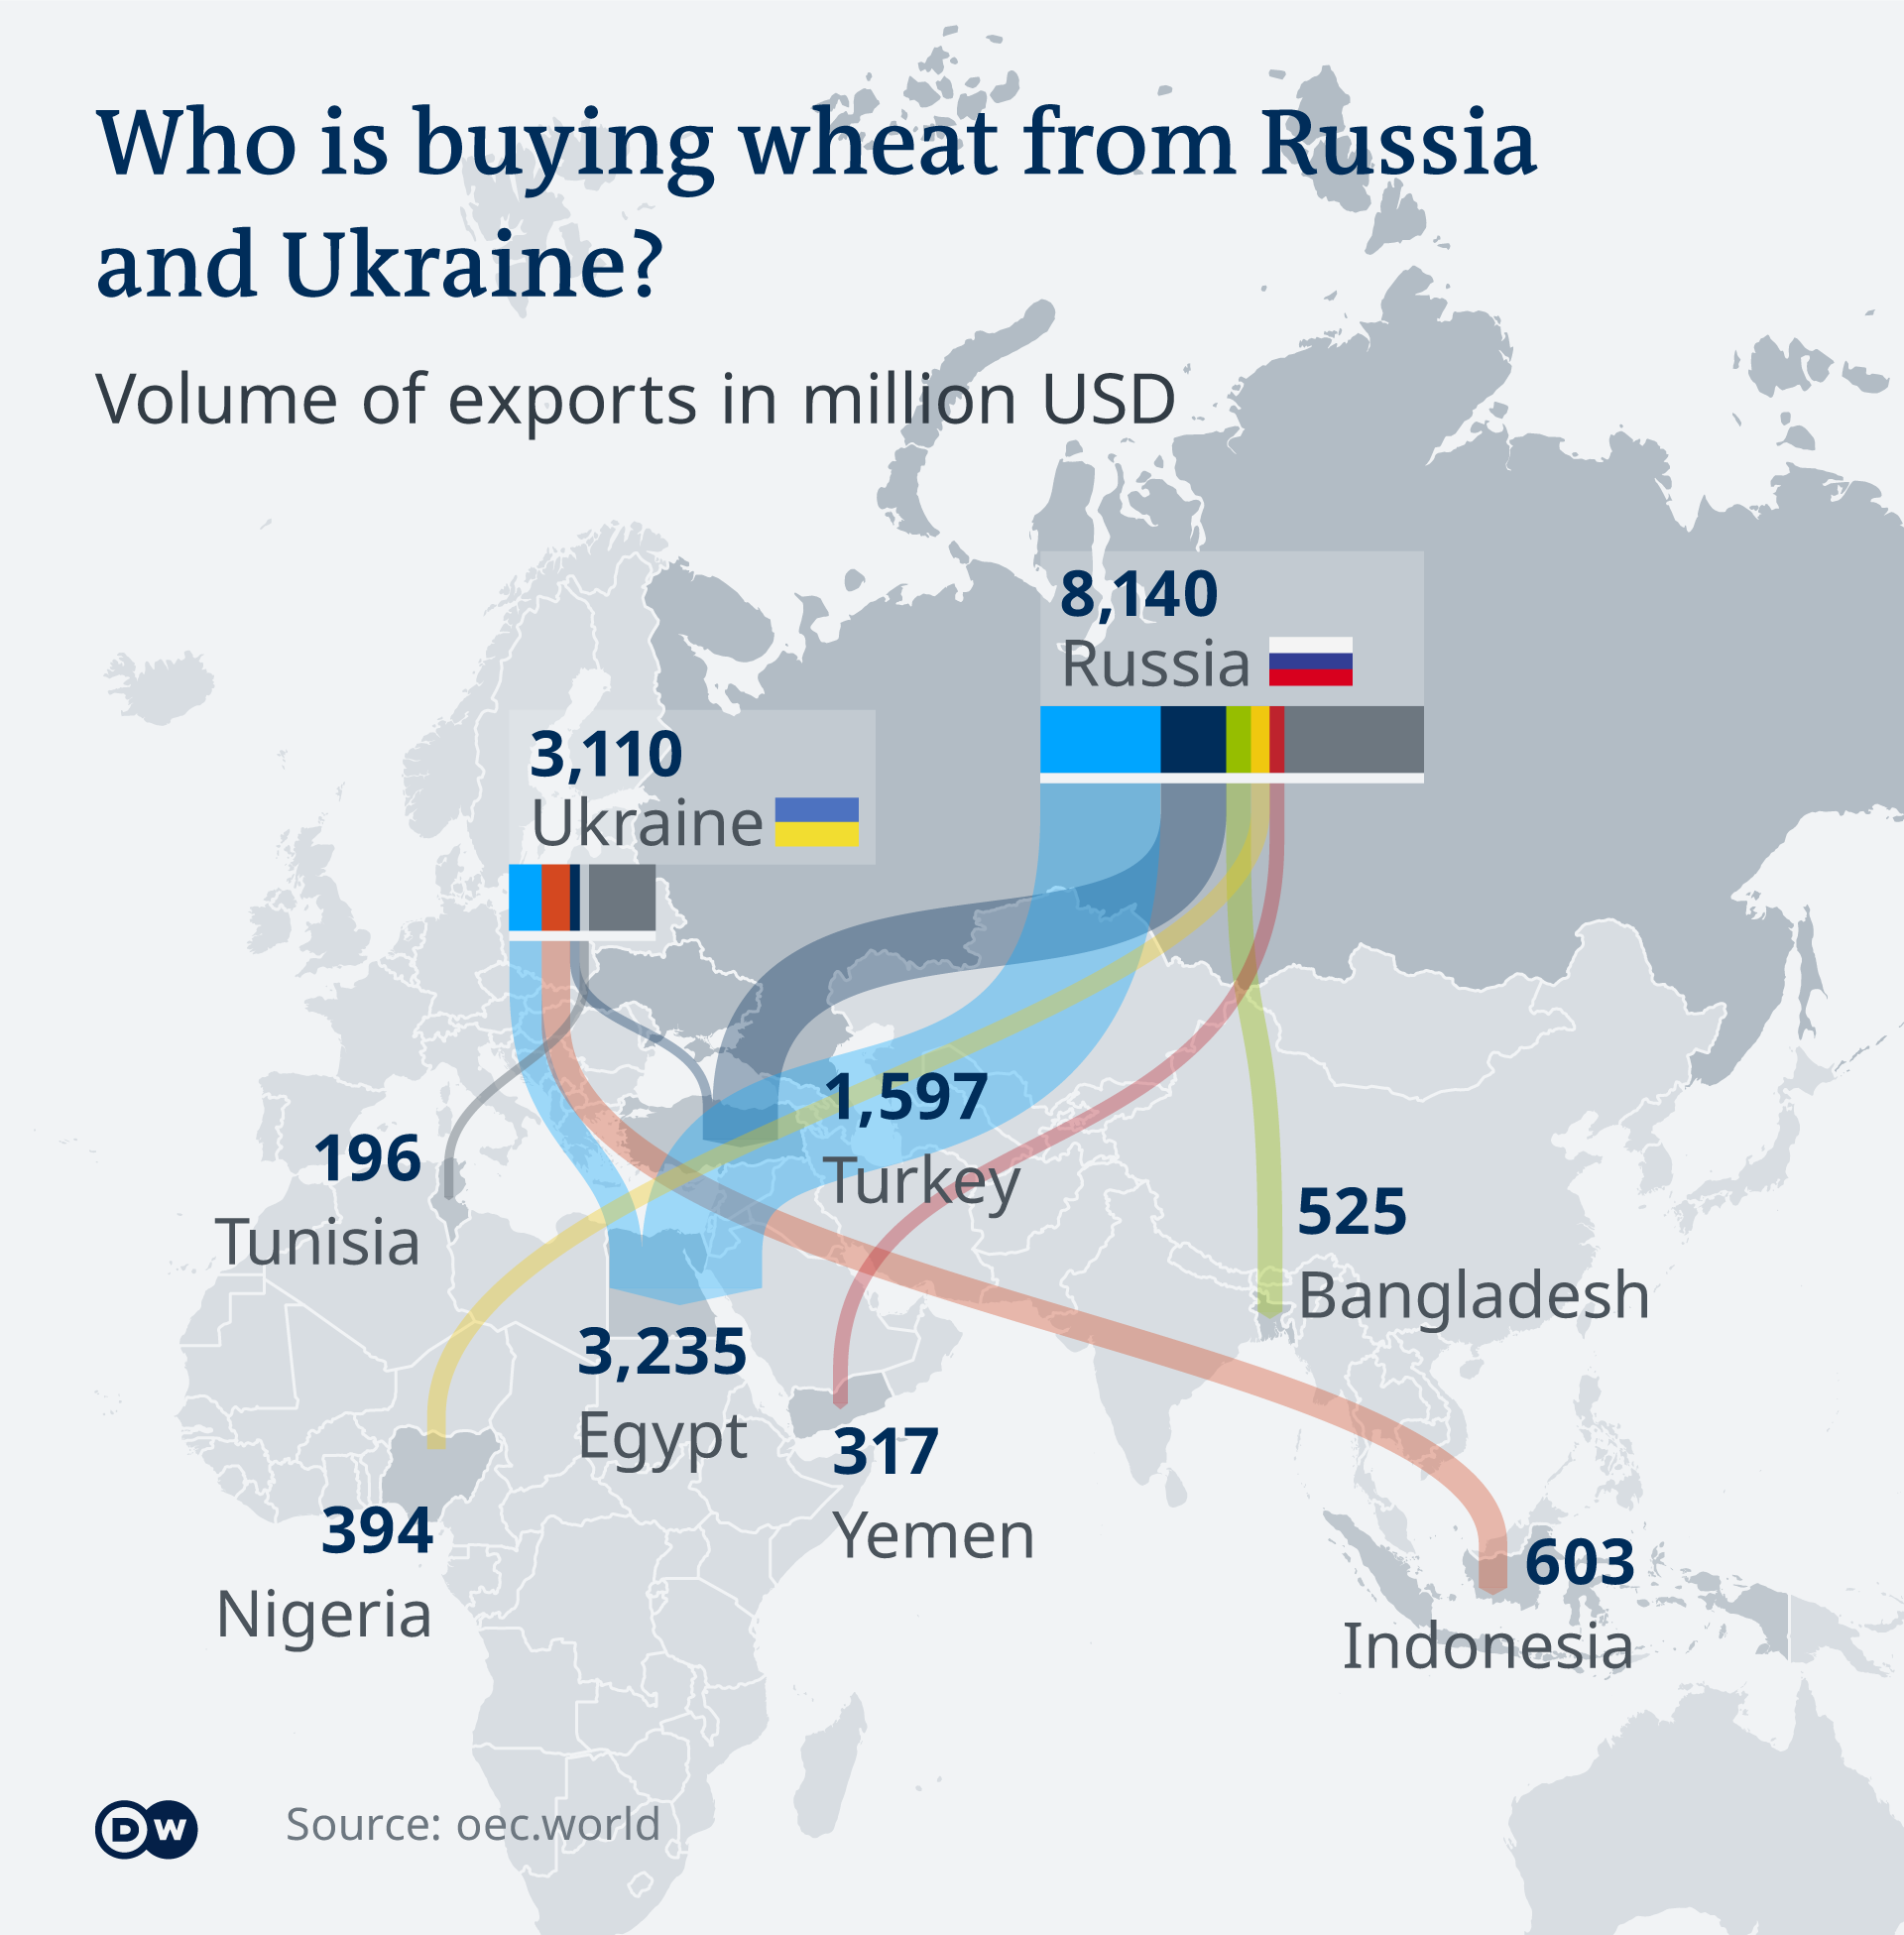 Overview of who buys wheat from whom (source: DW)